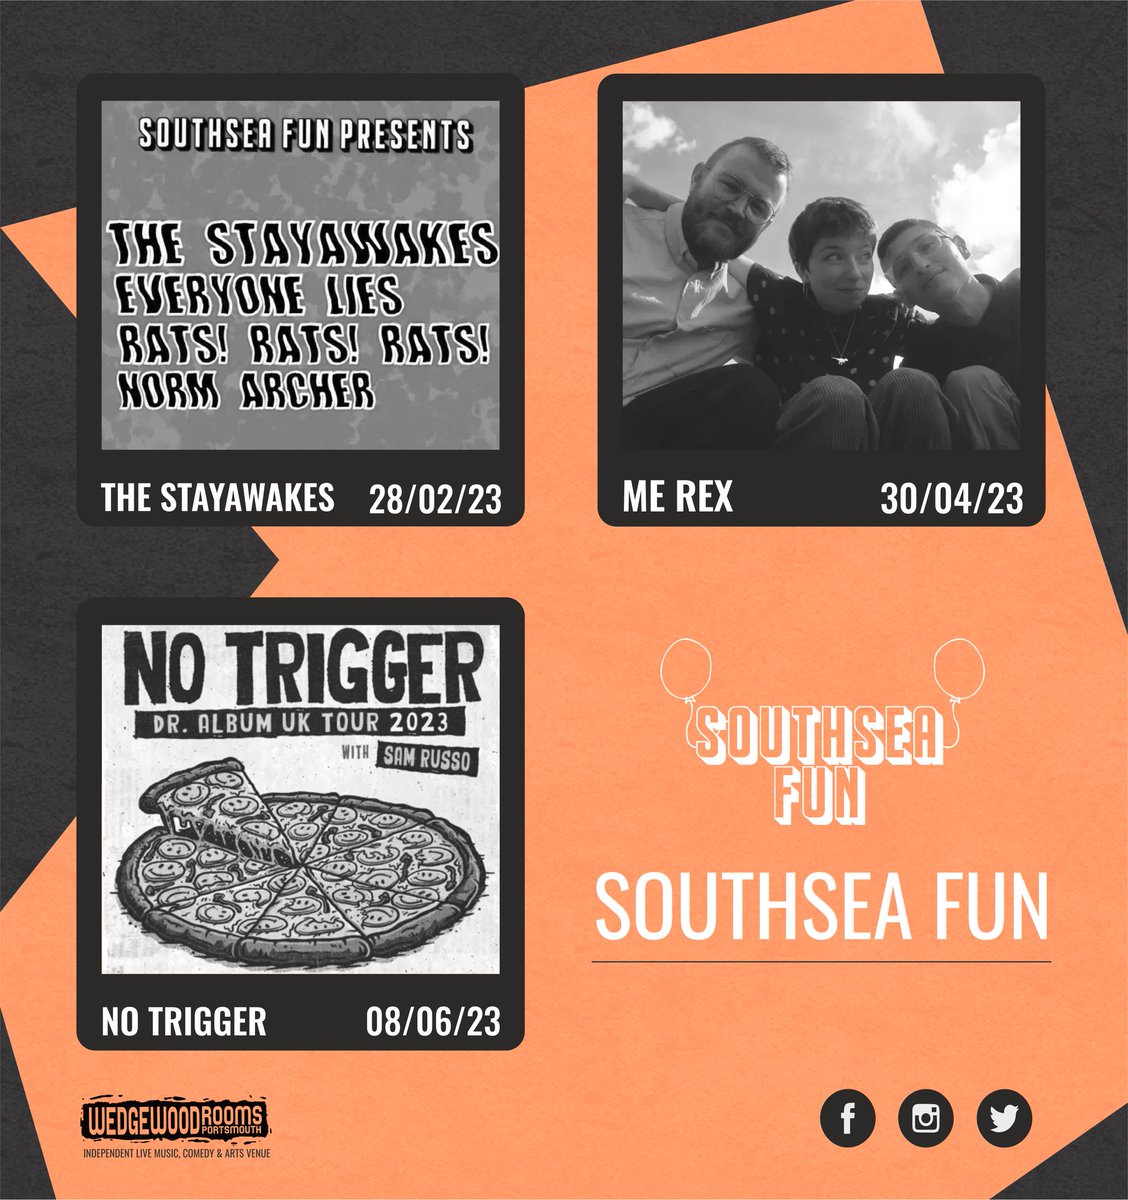 Check out the shows from Southsea Fun coming up!🤩 @thestayawakes w/ Everyone Lies, Rats Rats Rats and @NormArcherMusic @merexband w/ @regalcheer, Halliwell and @YoungPretorians @notrigger w/ @samrussomusic Tickets available from wedgewood-rooms.co.uk